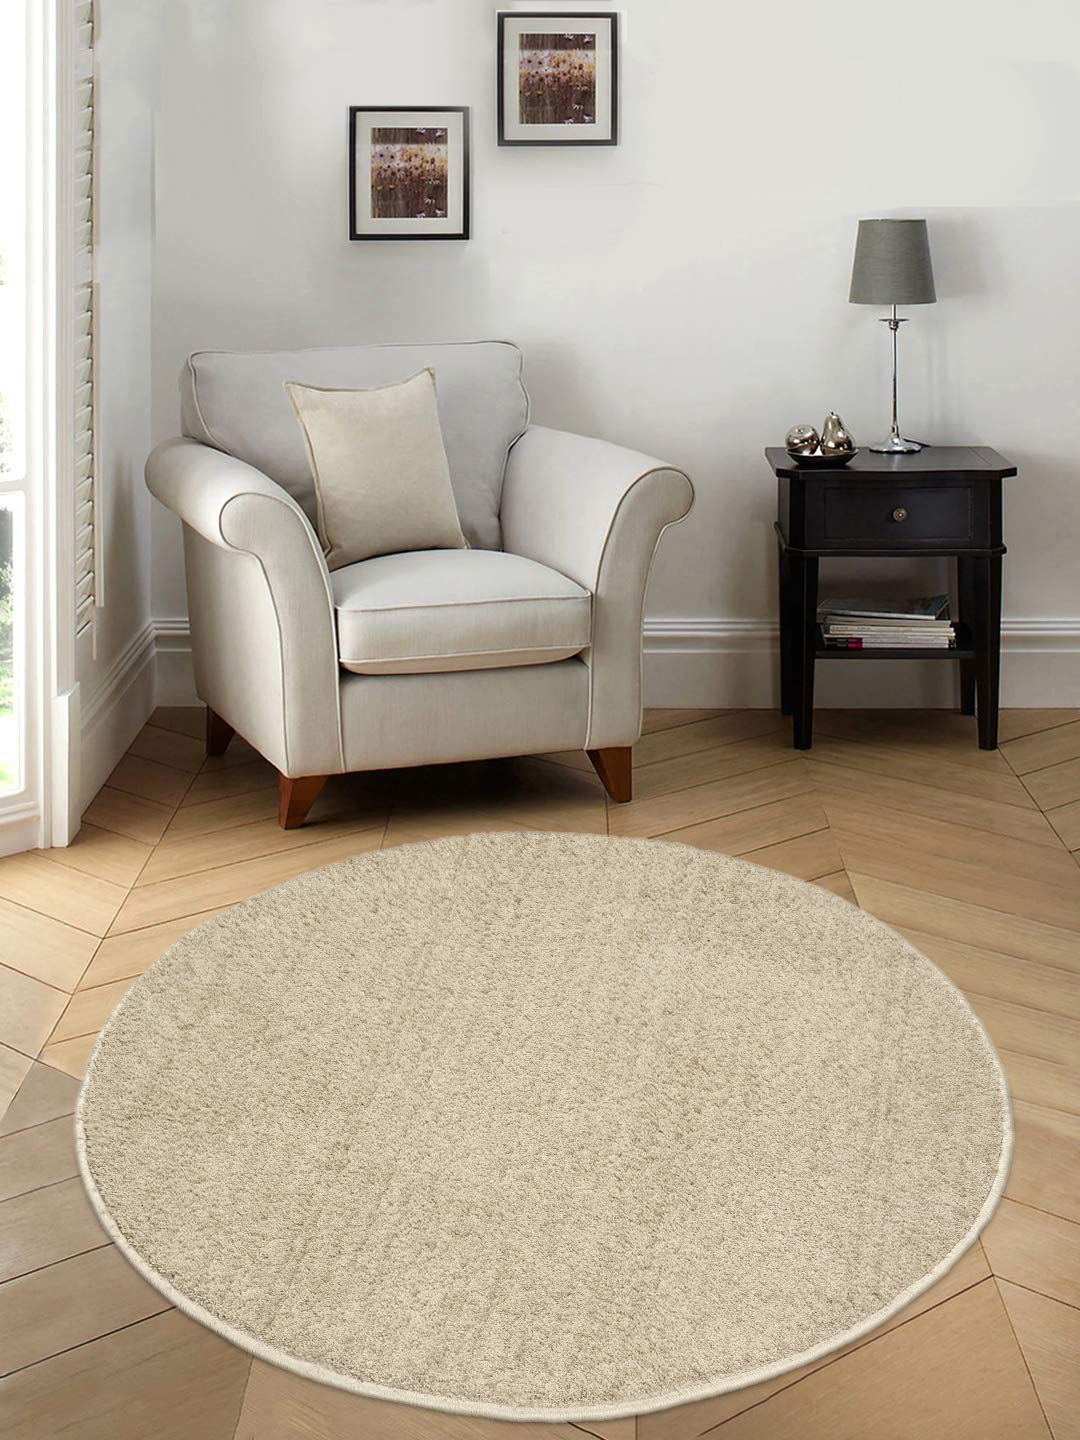 Saral Home Beige Solid Cotton Shaggy Yarn Anti-Skid Round Floor Mat Price in India